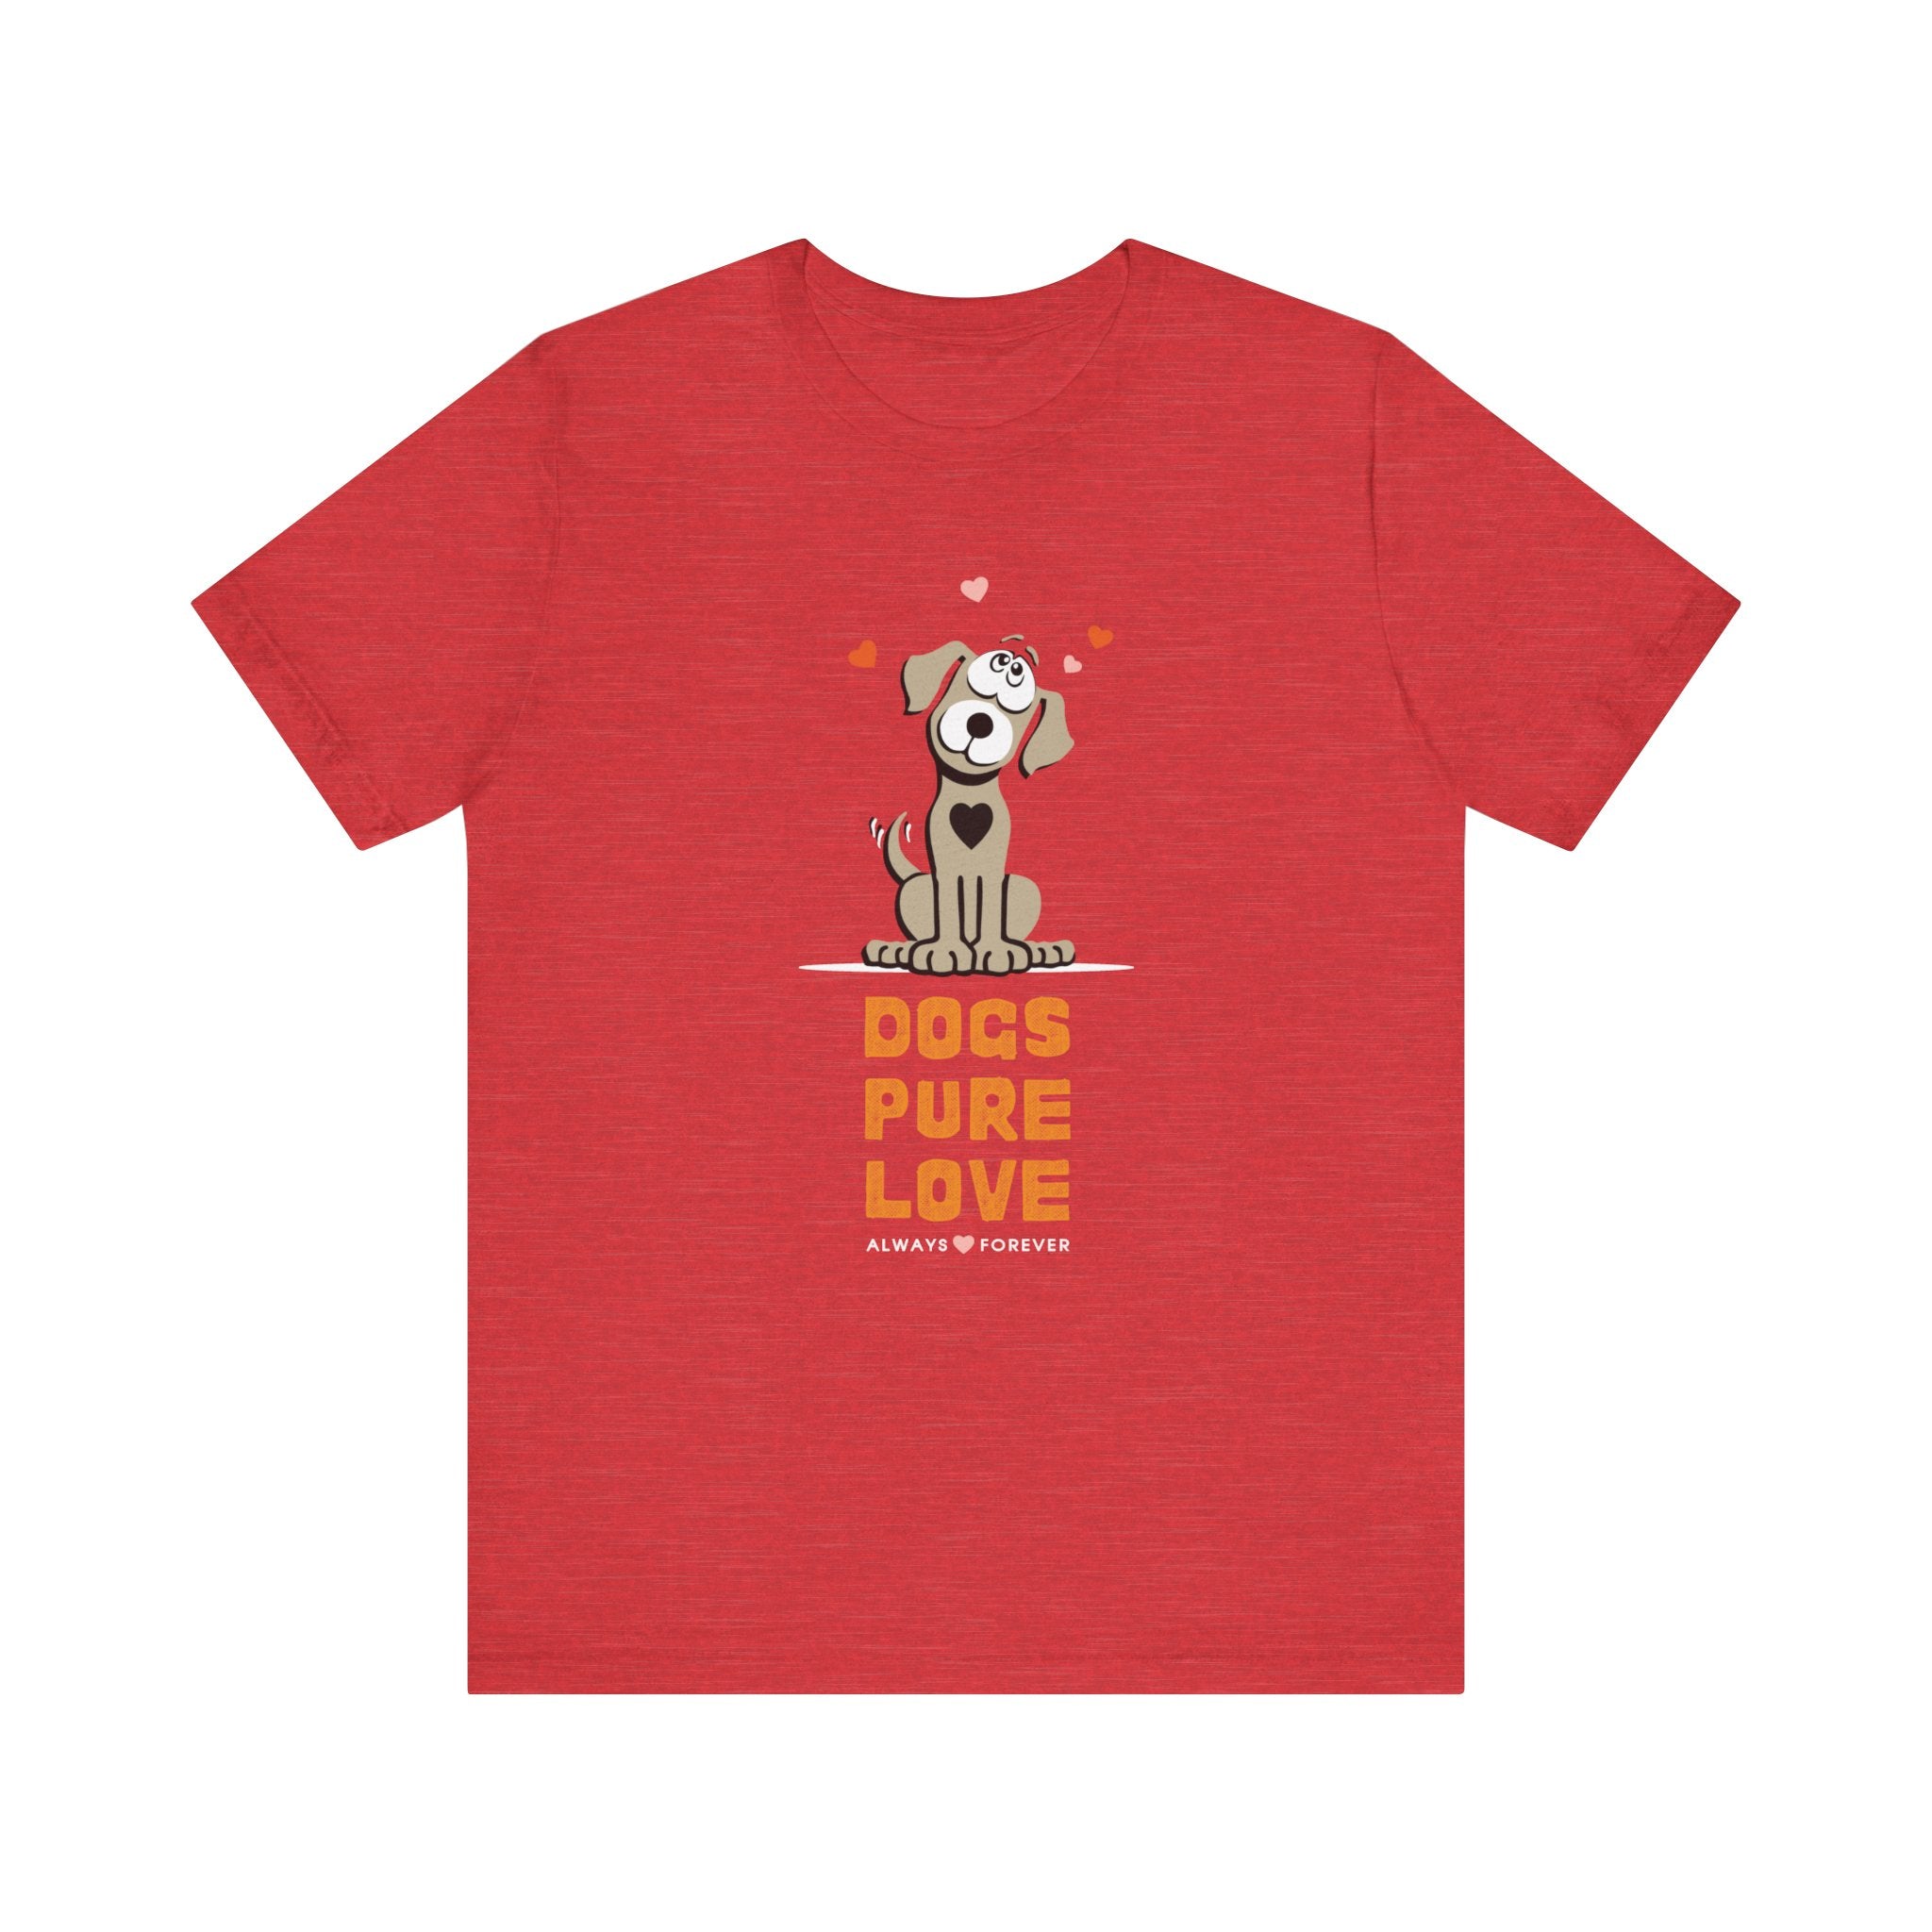 Against a white backdrop, a heather red unisex tee features the Dogs Pure Love logo.